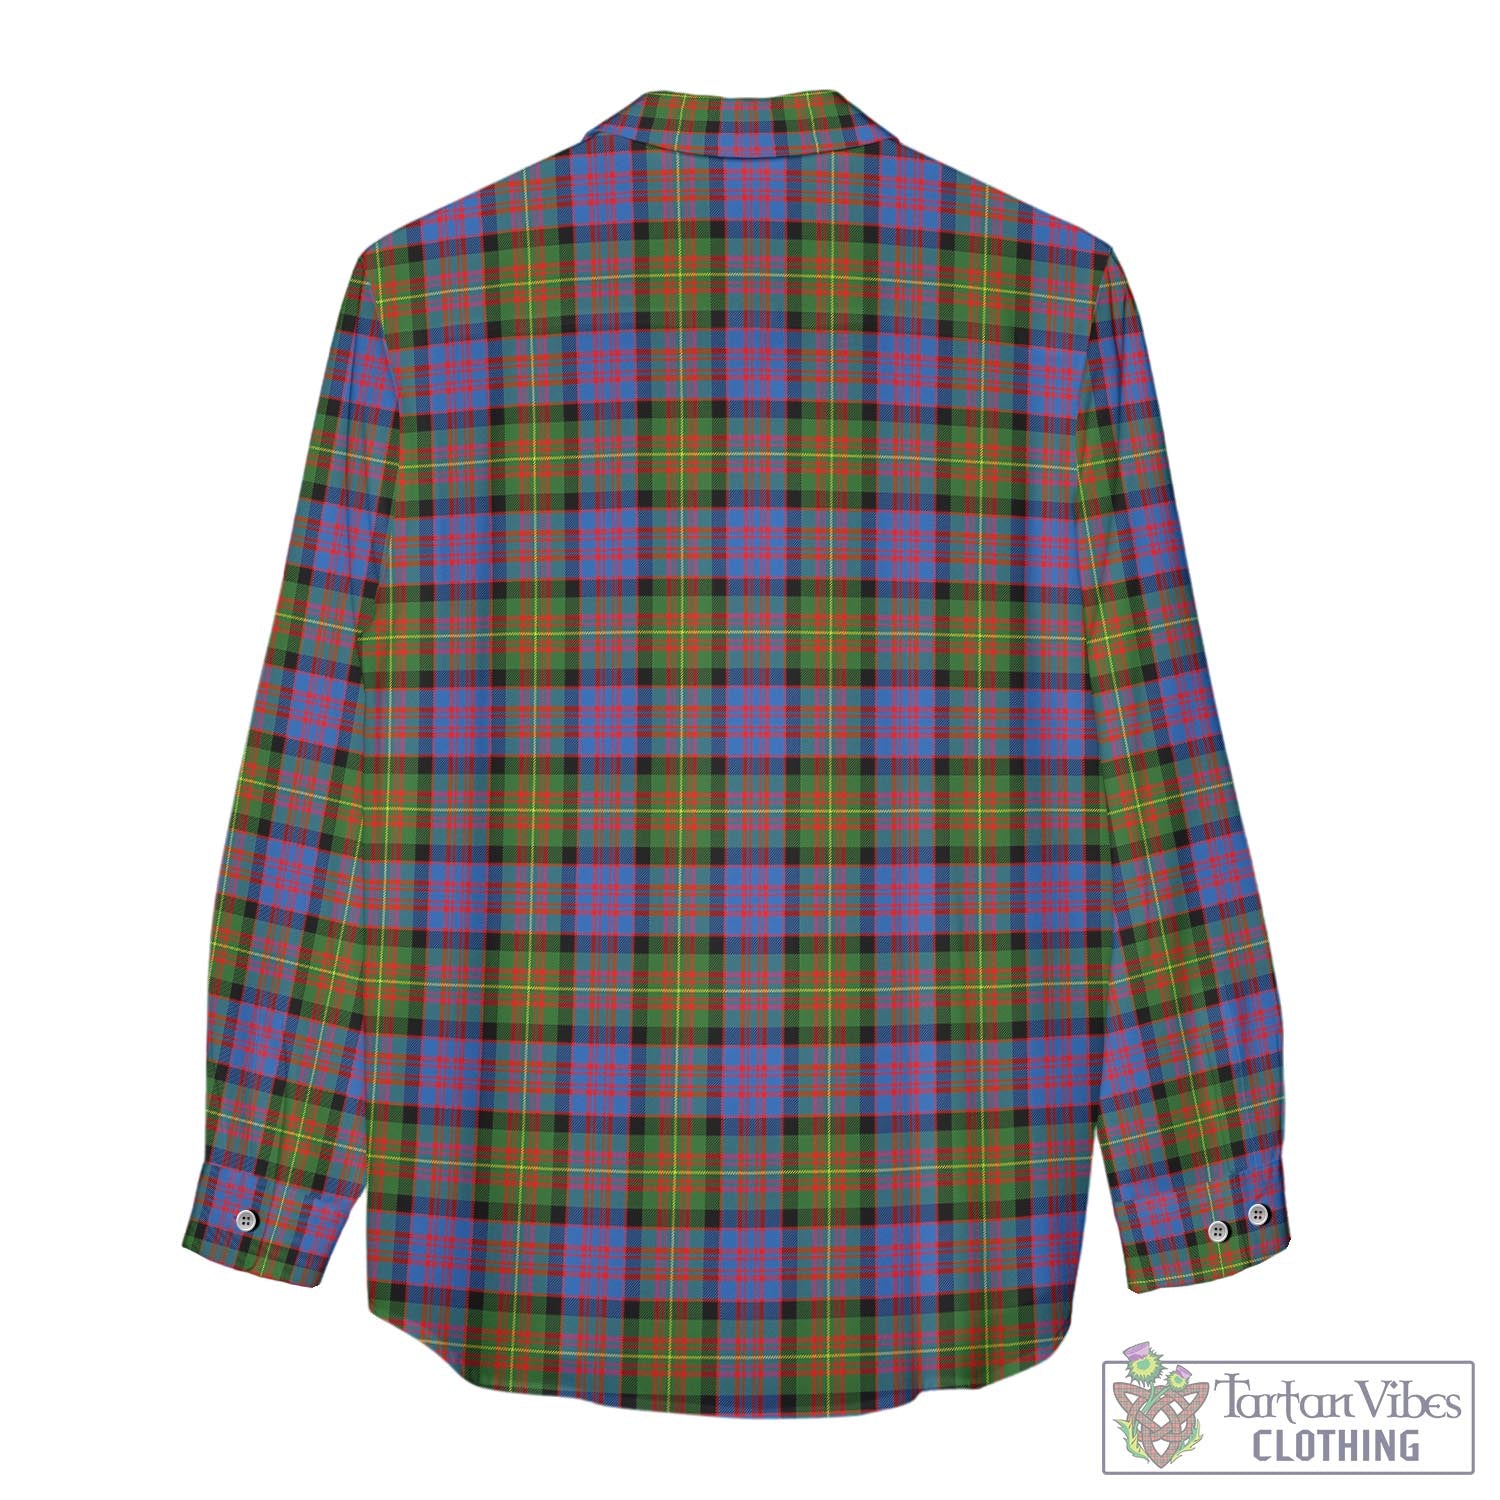 Tartan Vibes Clothing Carnegie Ancient Tartan Womens Casual Shirt with Family Crest